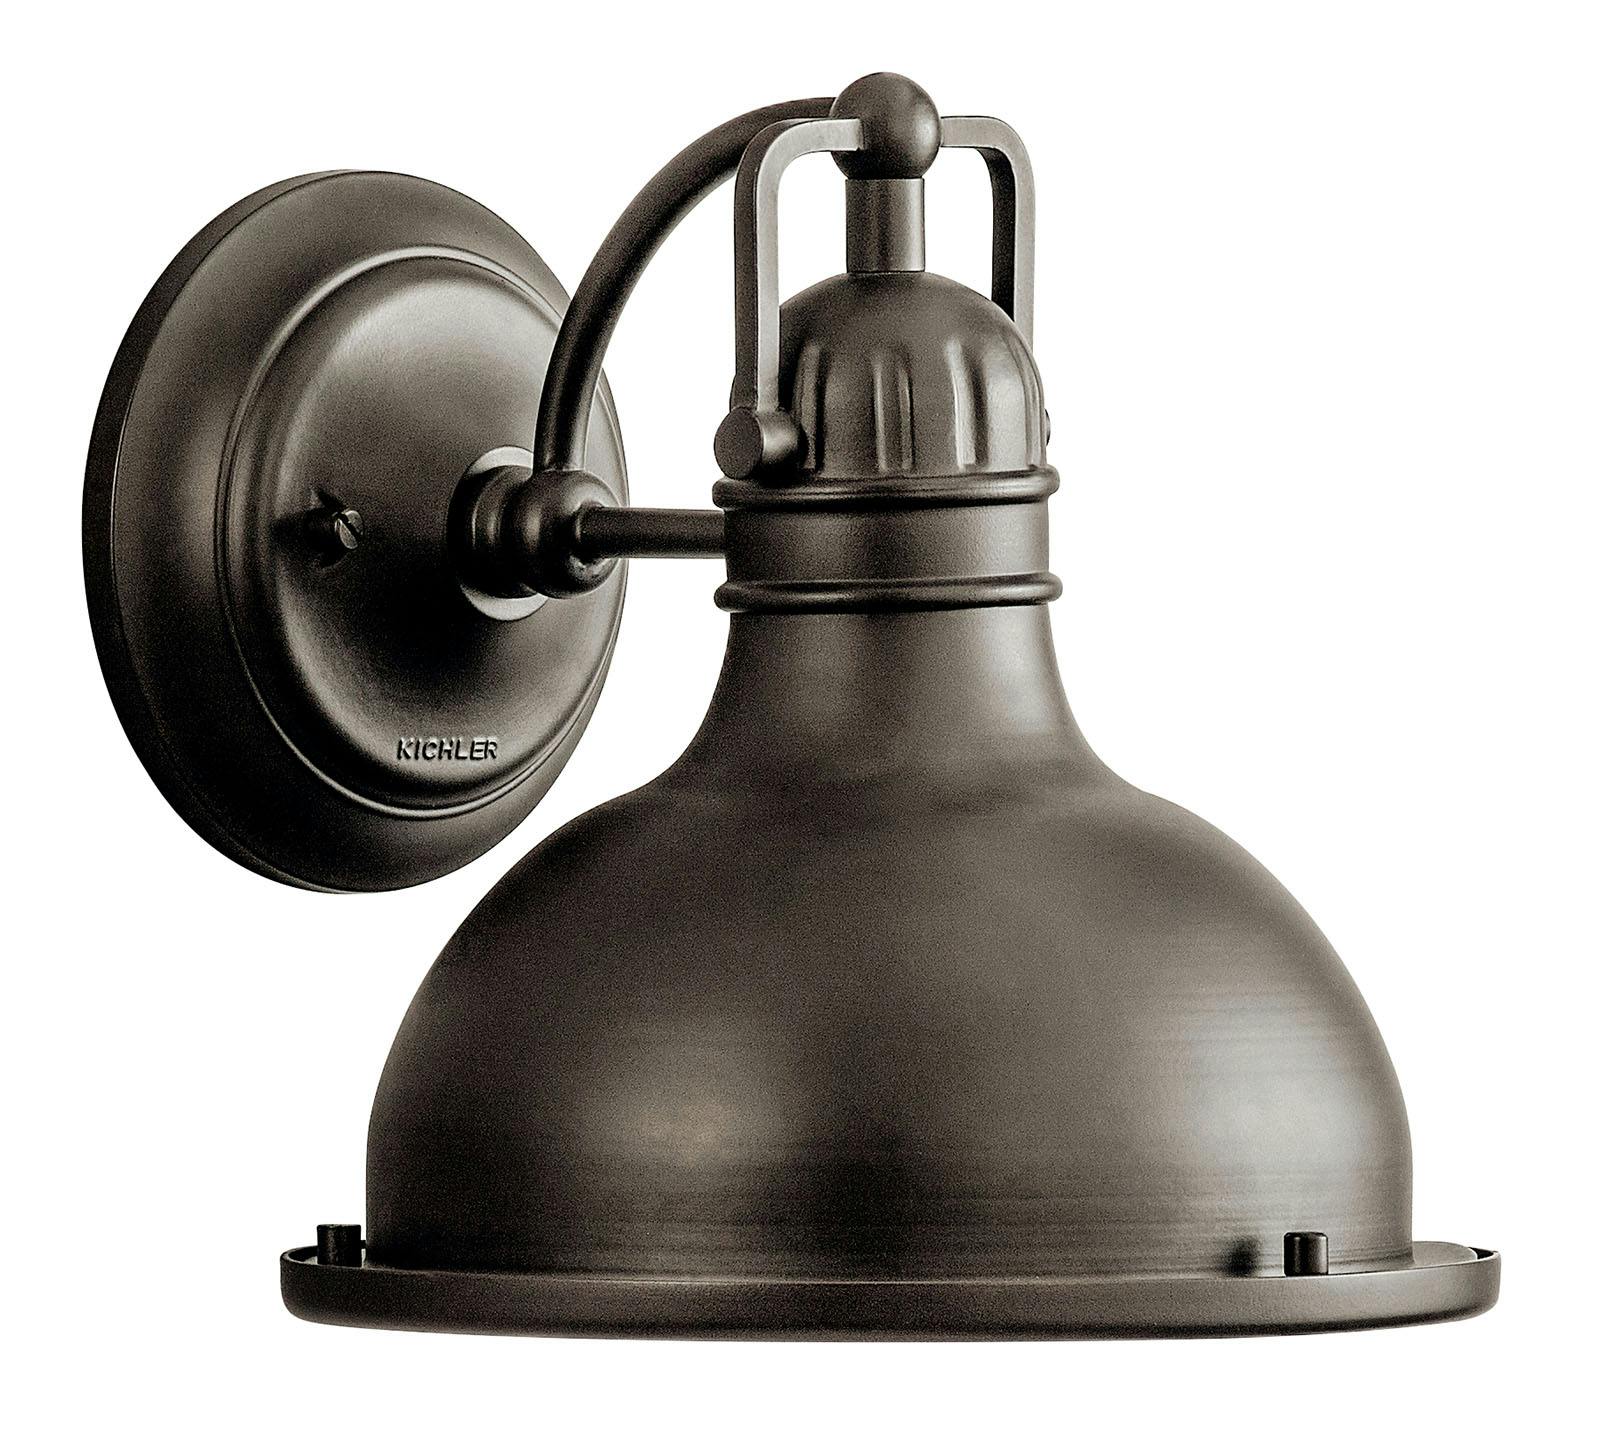 Dome shaped wall light in a medium bronze color